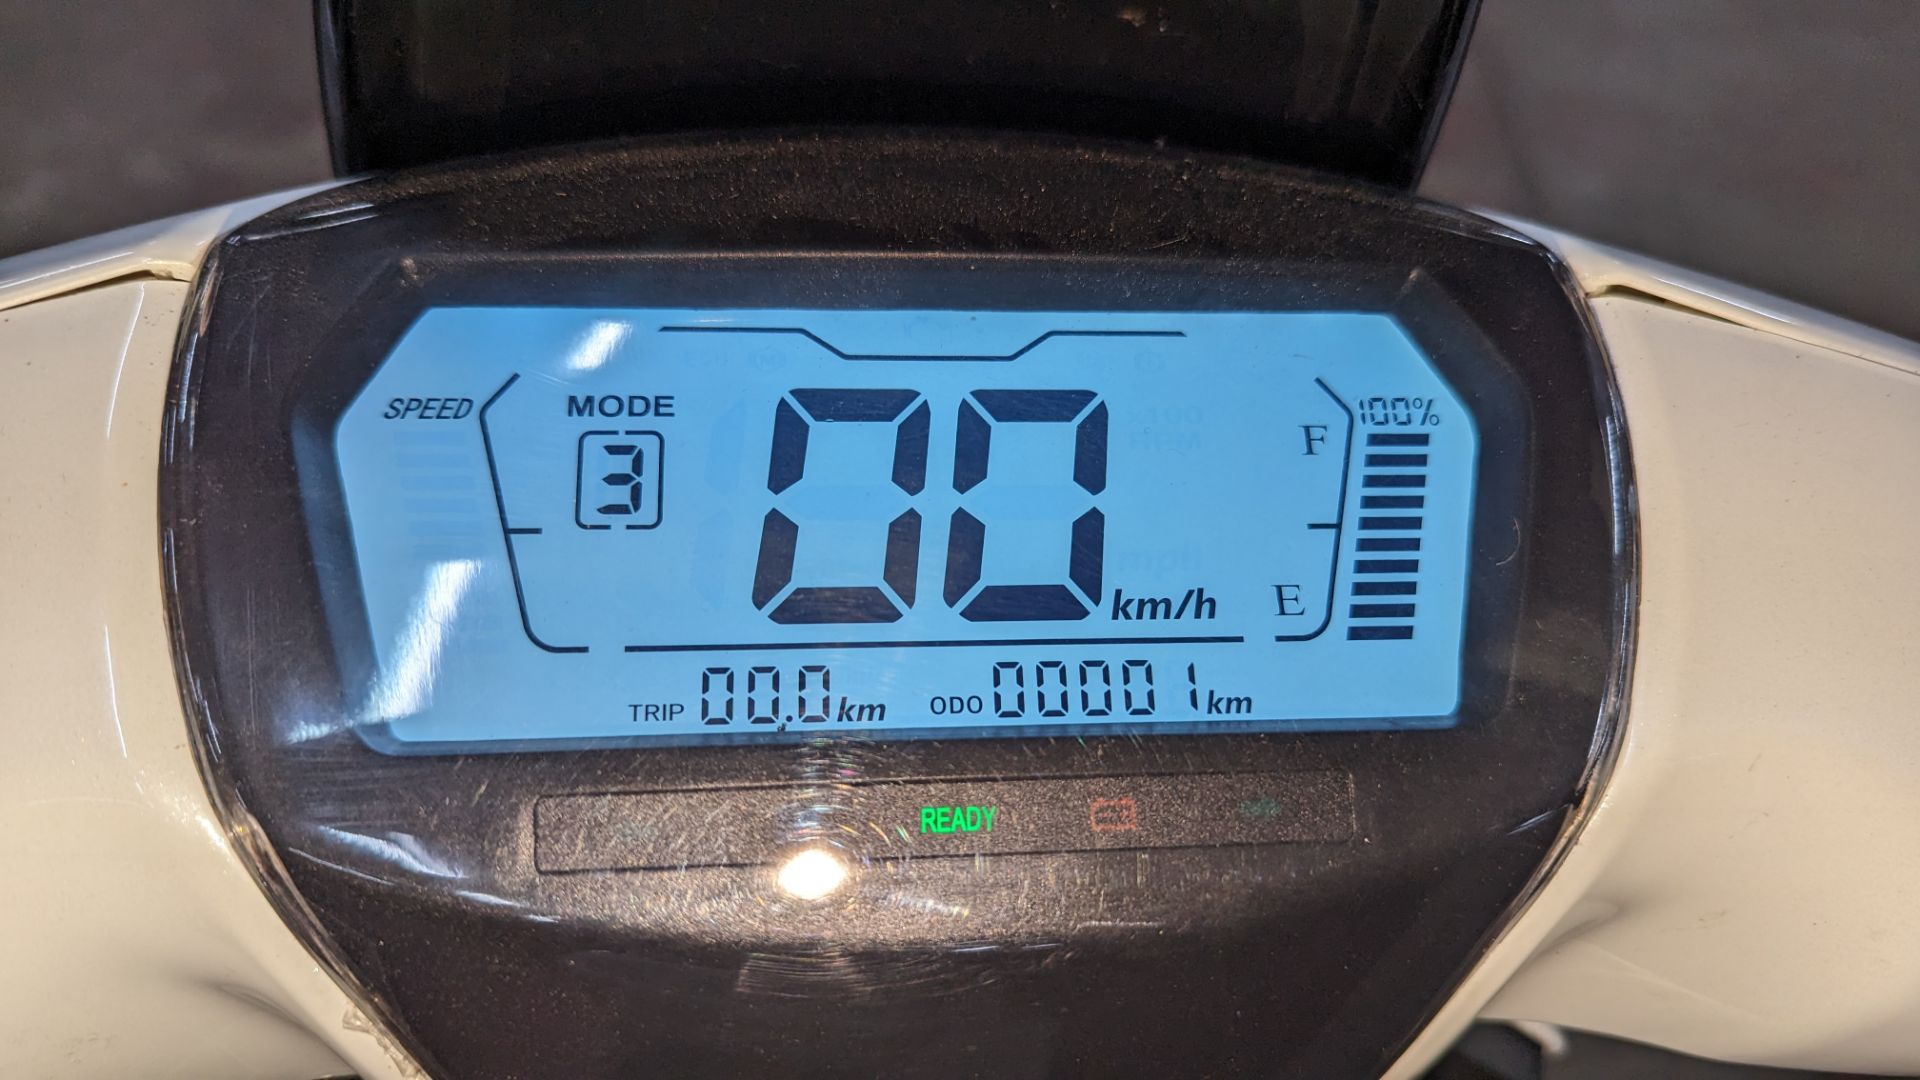 Model 18 Electric Bike: Used/low miles, white body with black detailing. This bike is not brand new, - Image 10 of 13